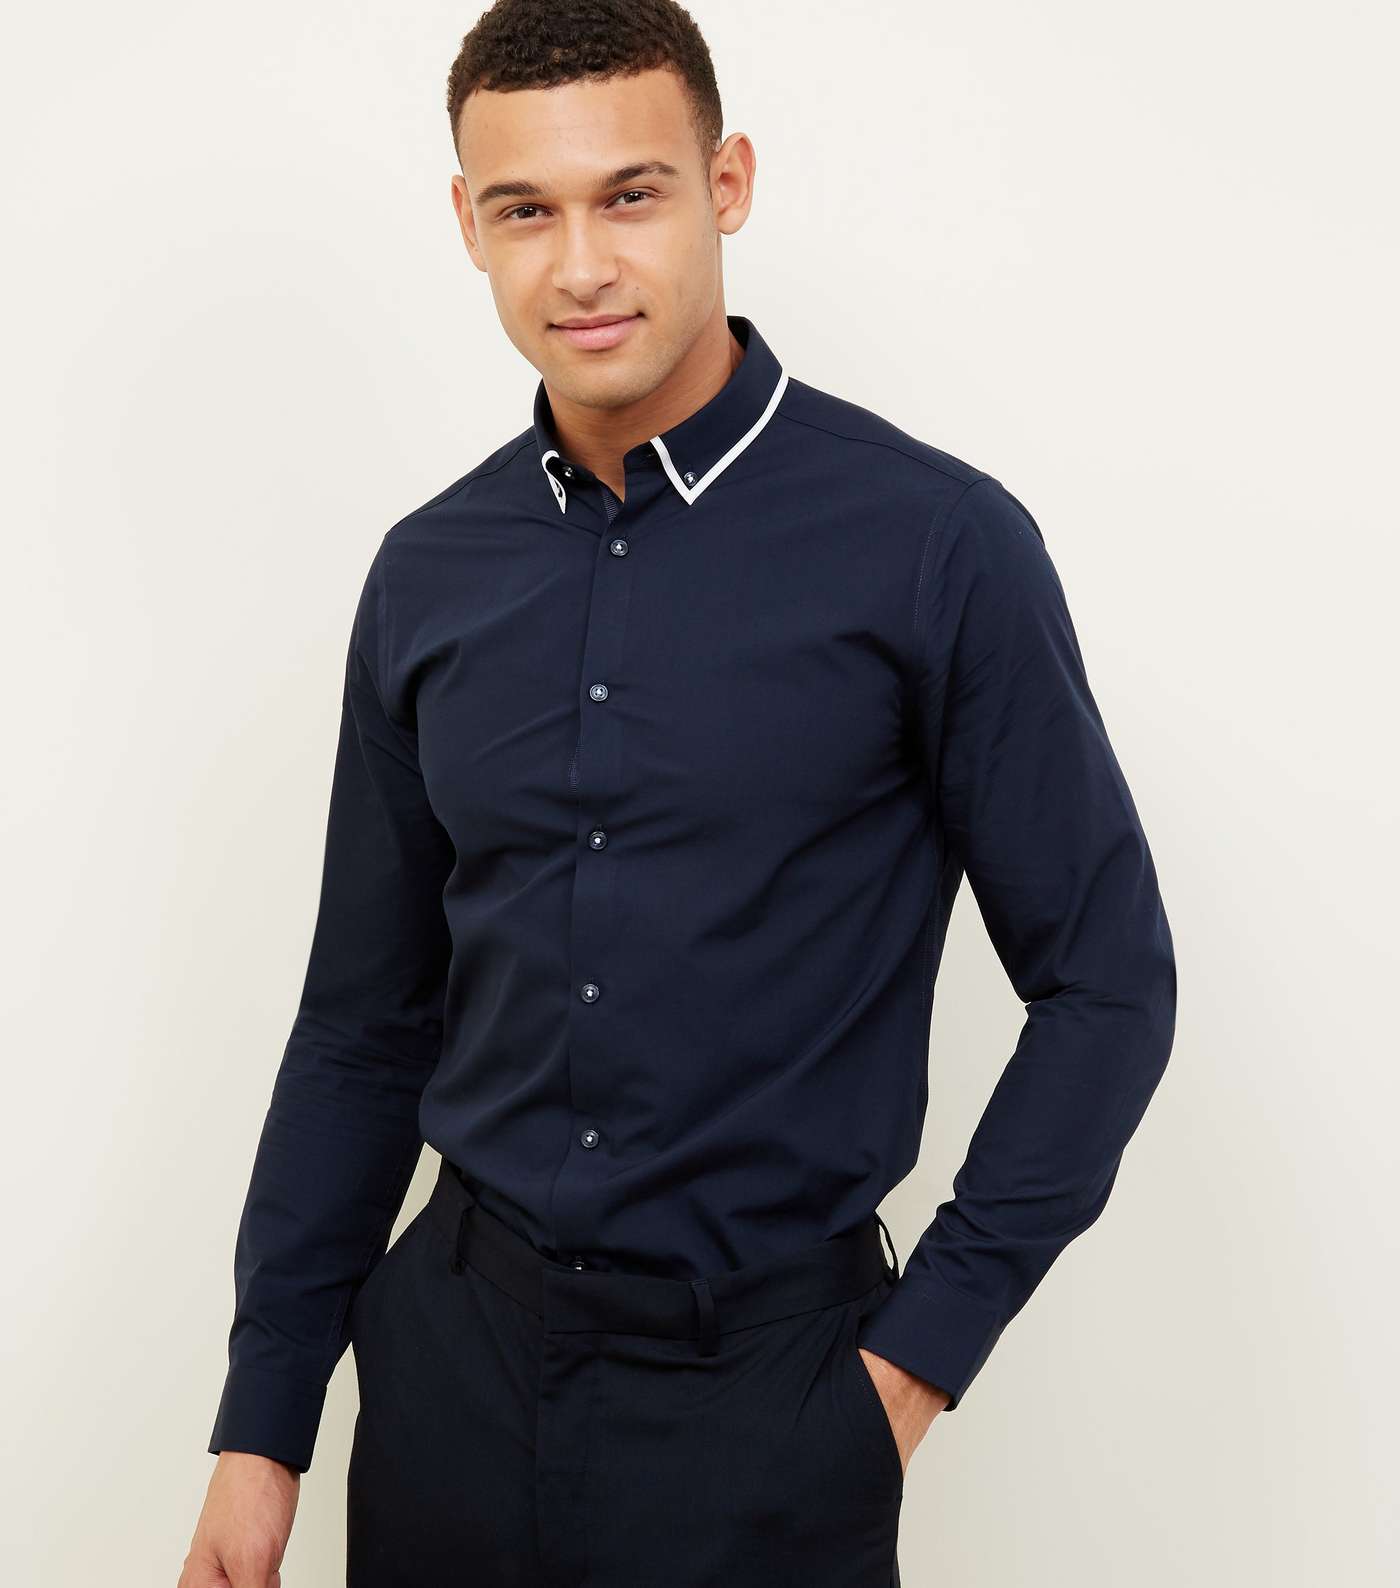 Navy Tipped White Collared Shirt